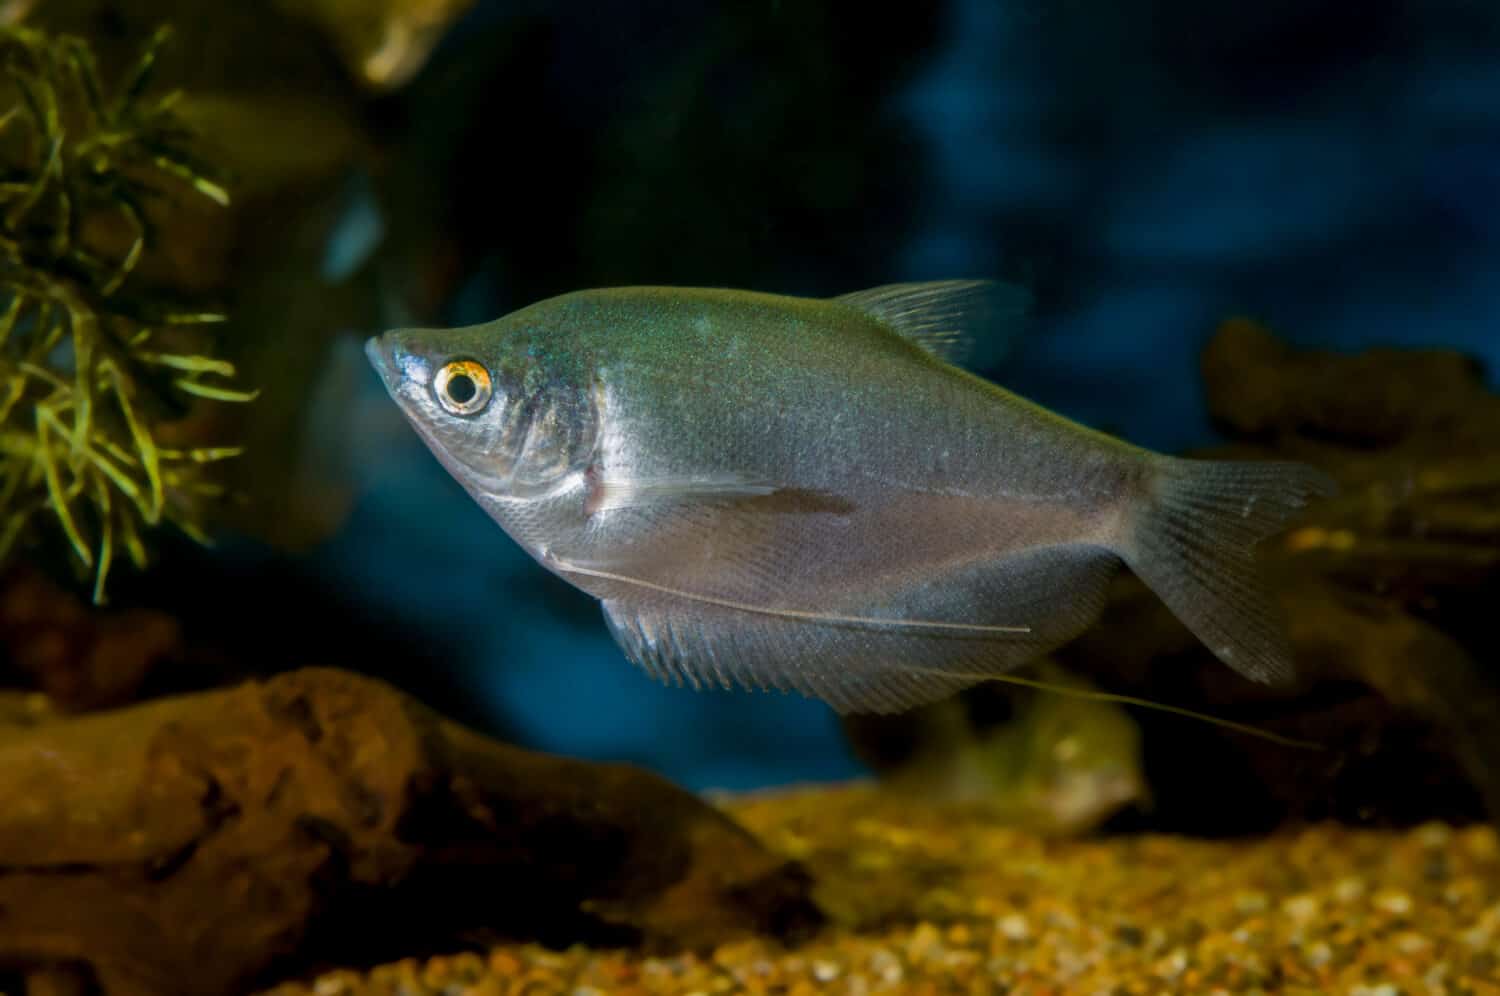 Minnesota. Aquarium fish. Moonlight gourami (Trichogaster microlepis) is a labyrinth fish of the family Osphronemidae. It may also be called the moonbeam gourami